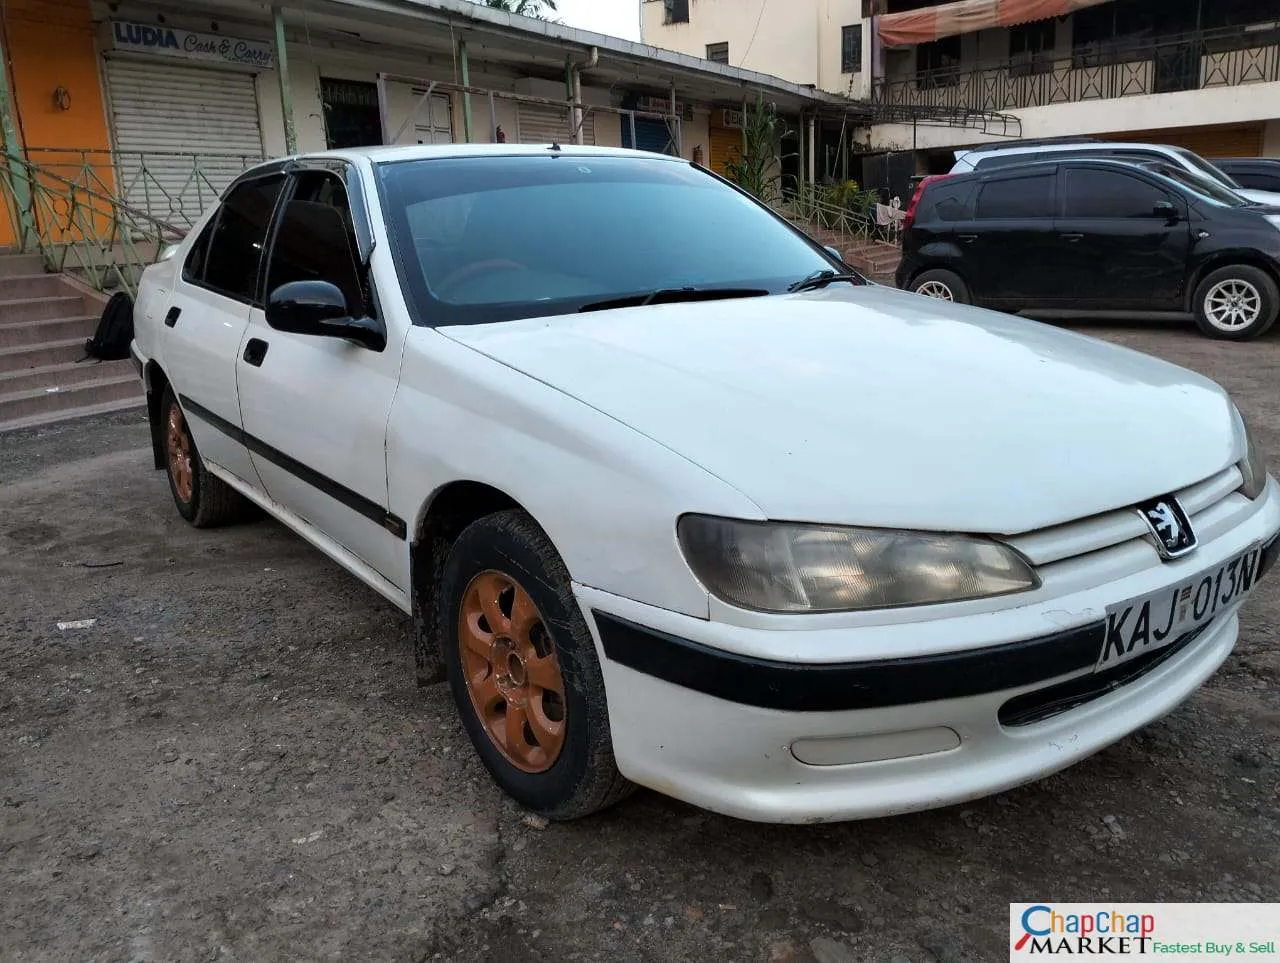 Peugeot 406 250K ONLY Cheapest You ONLY Pay 30% Deposit Trade in Ok Wow! PEUGEOT for sale on Kenya hire purchase installments peugeot kenya